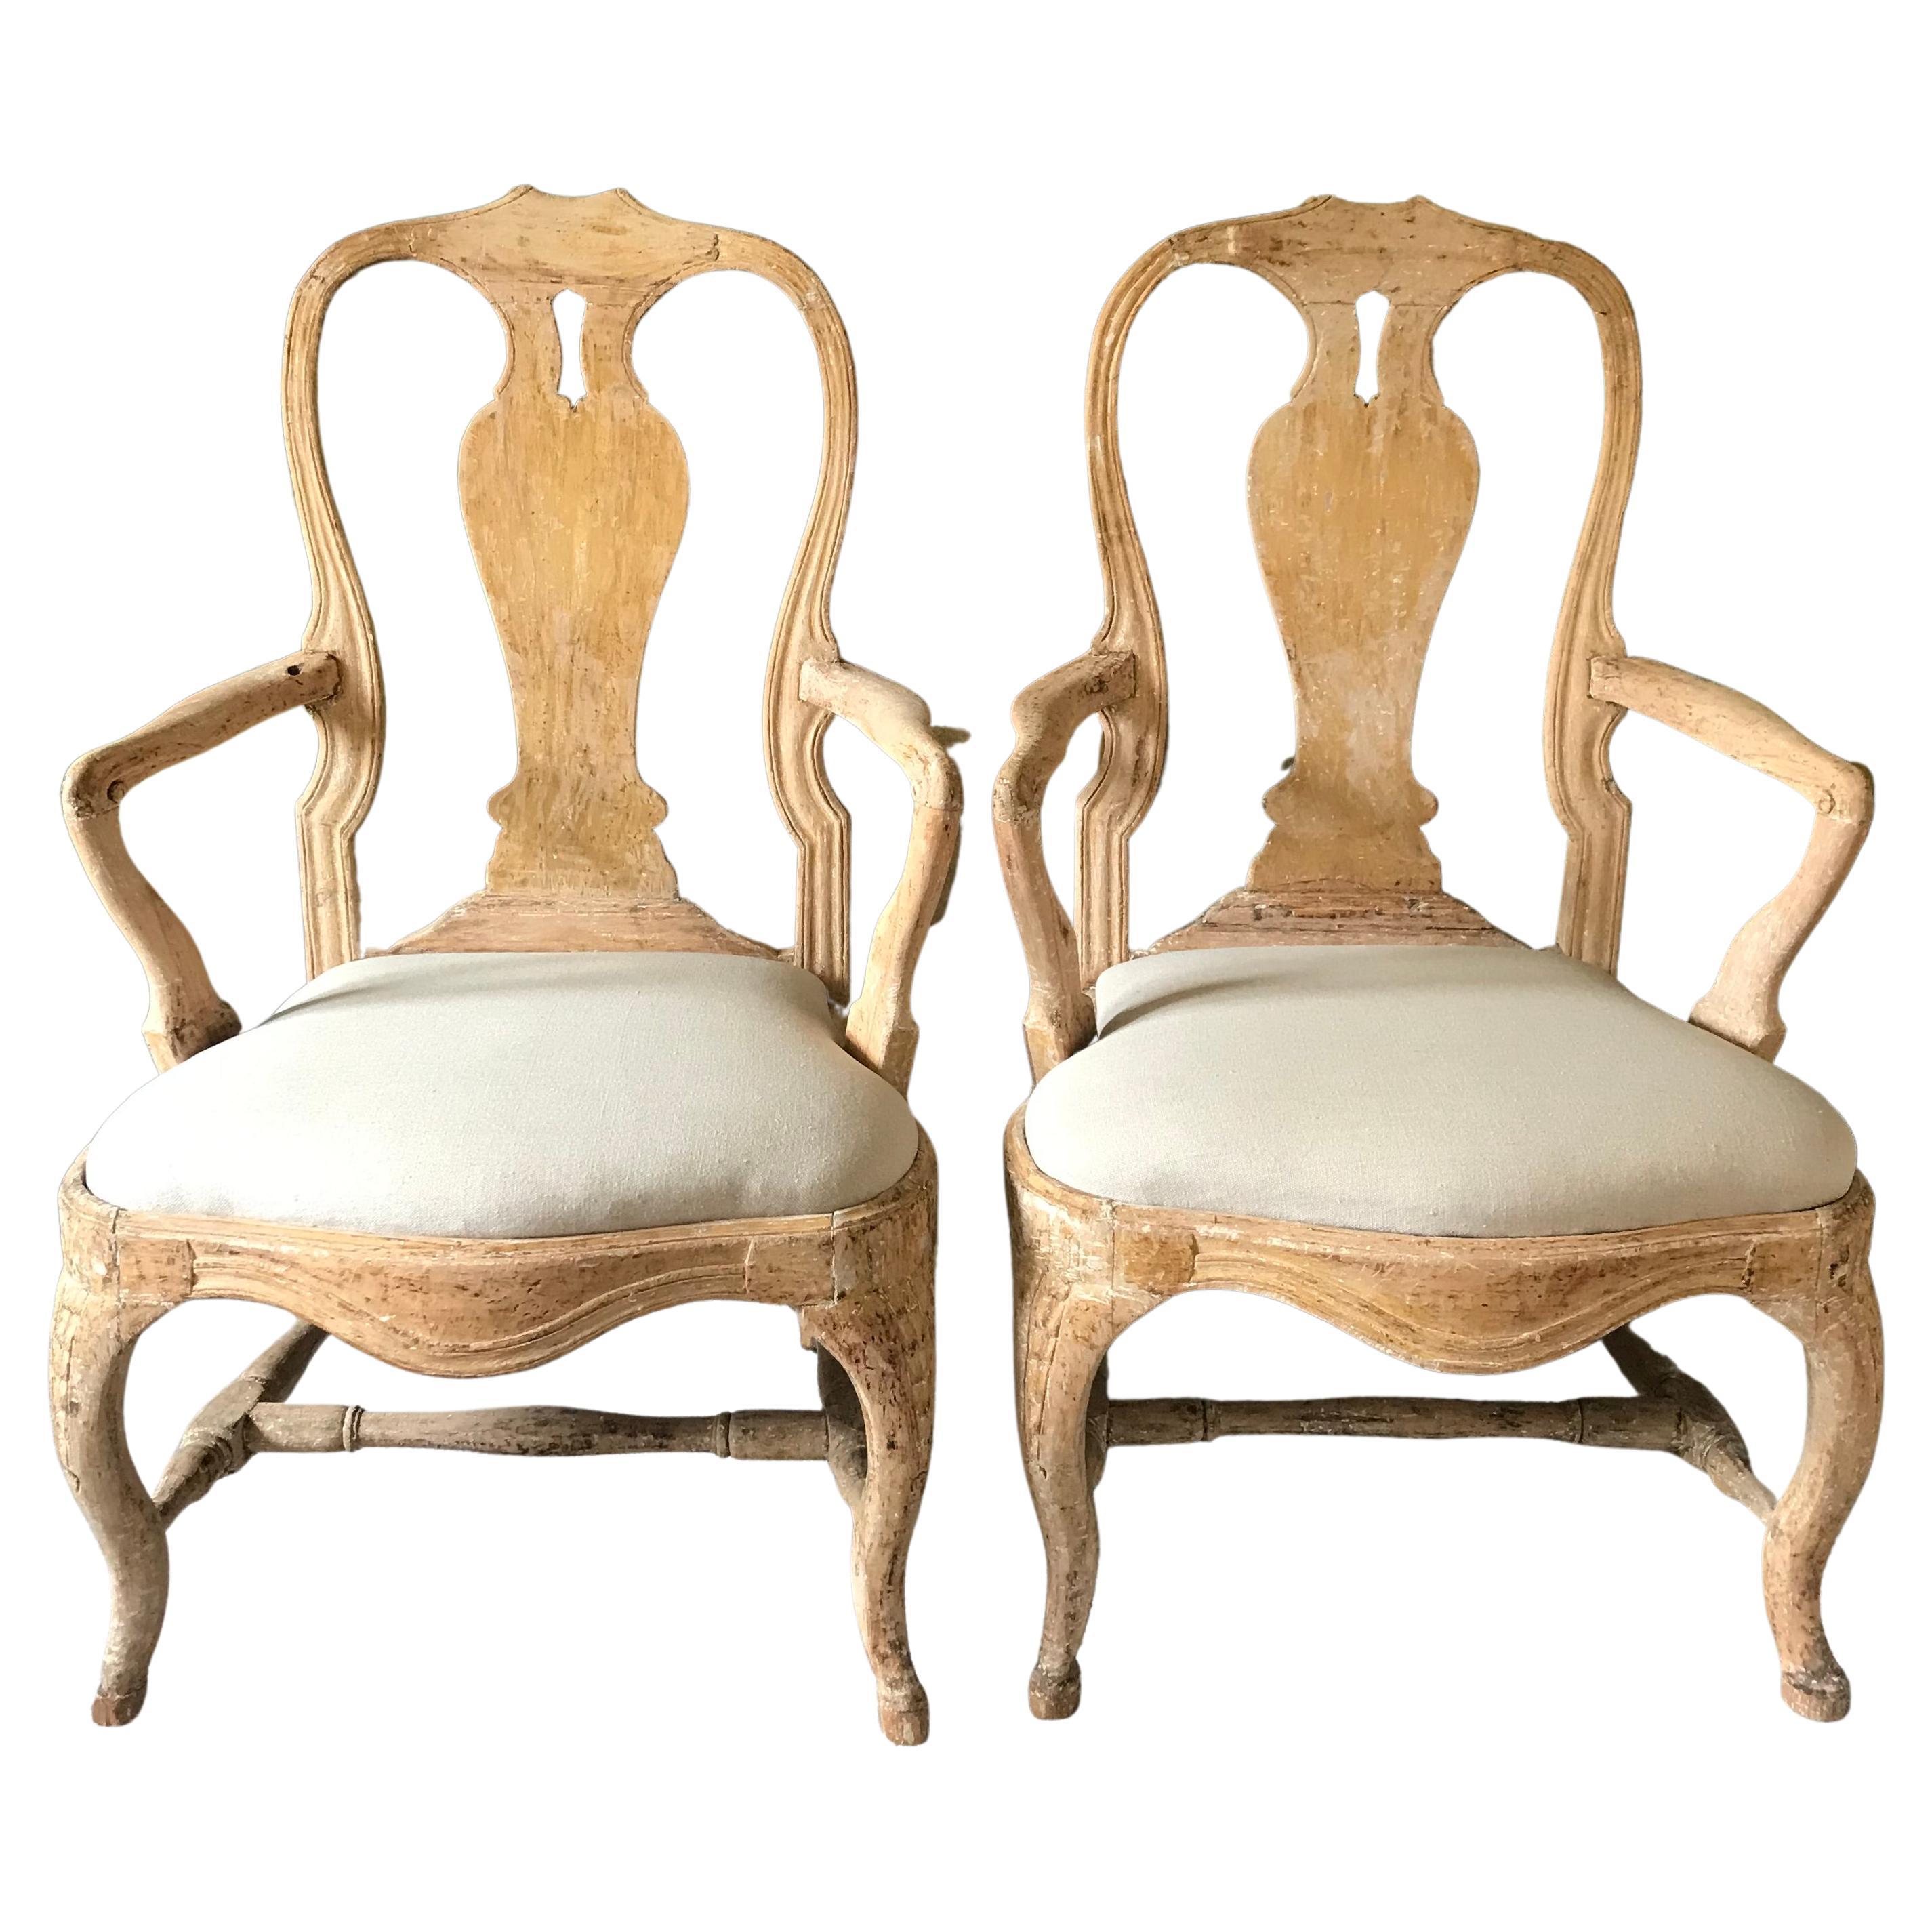 Pair of 18th Century Swedish Chairs For Sale